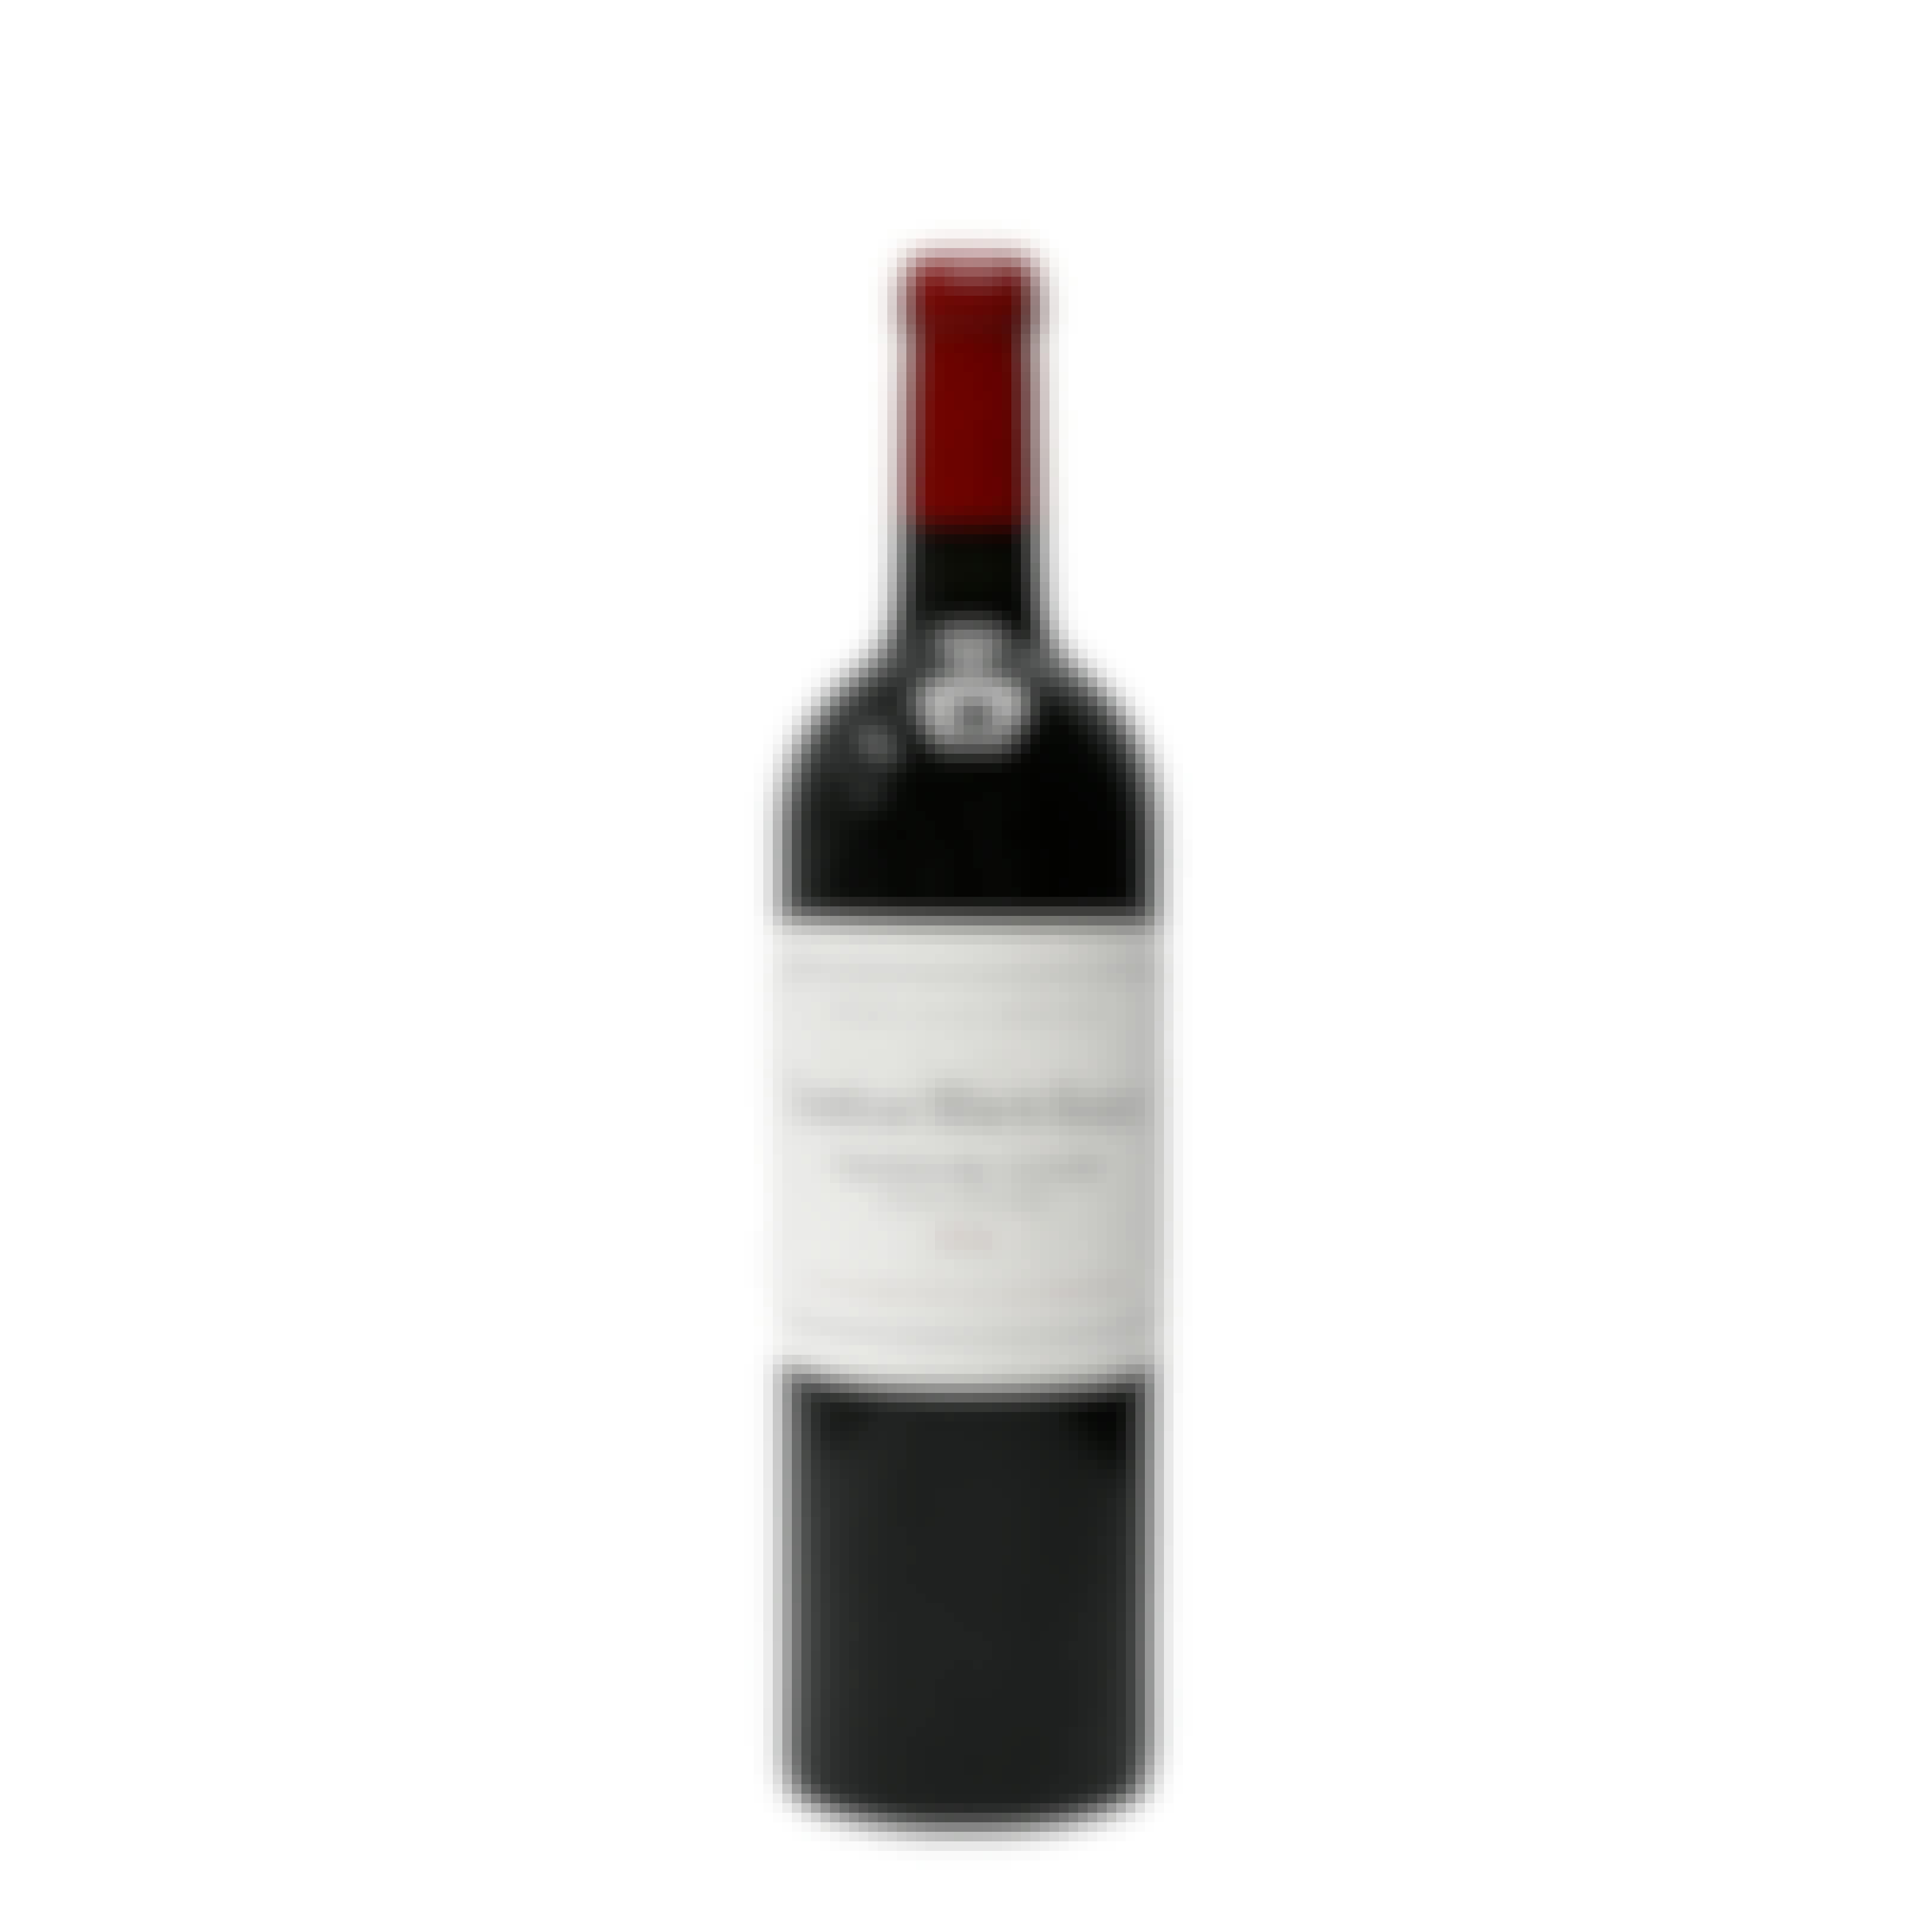 Chateau Haut-Bailly HAUT-BAILLY   2019 750ml